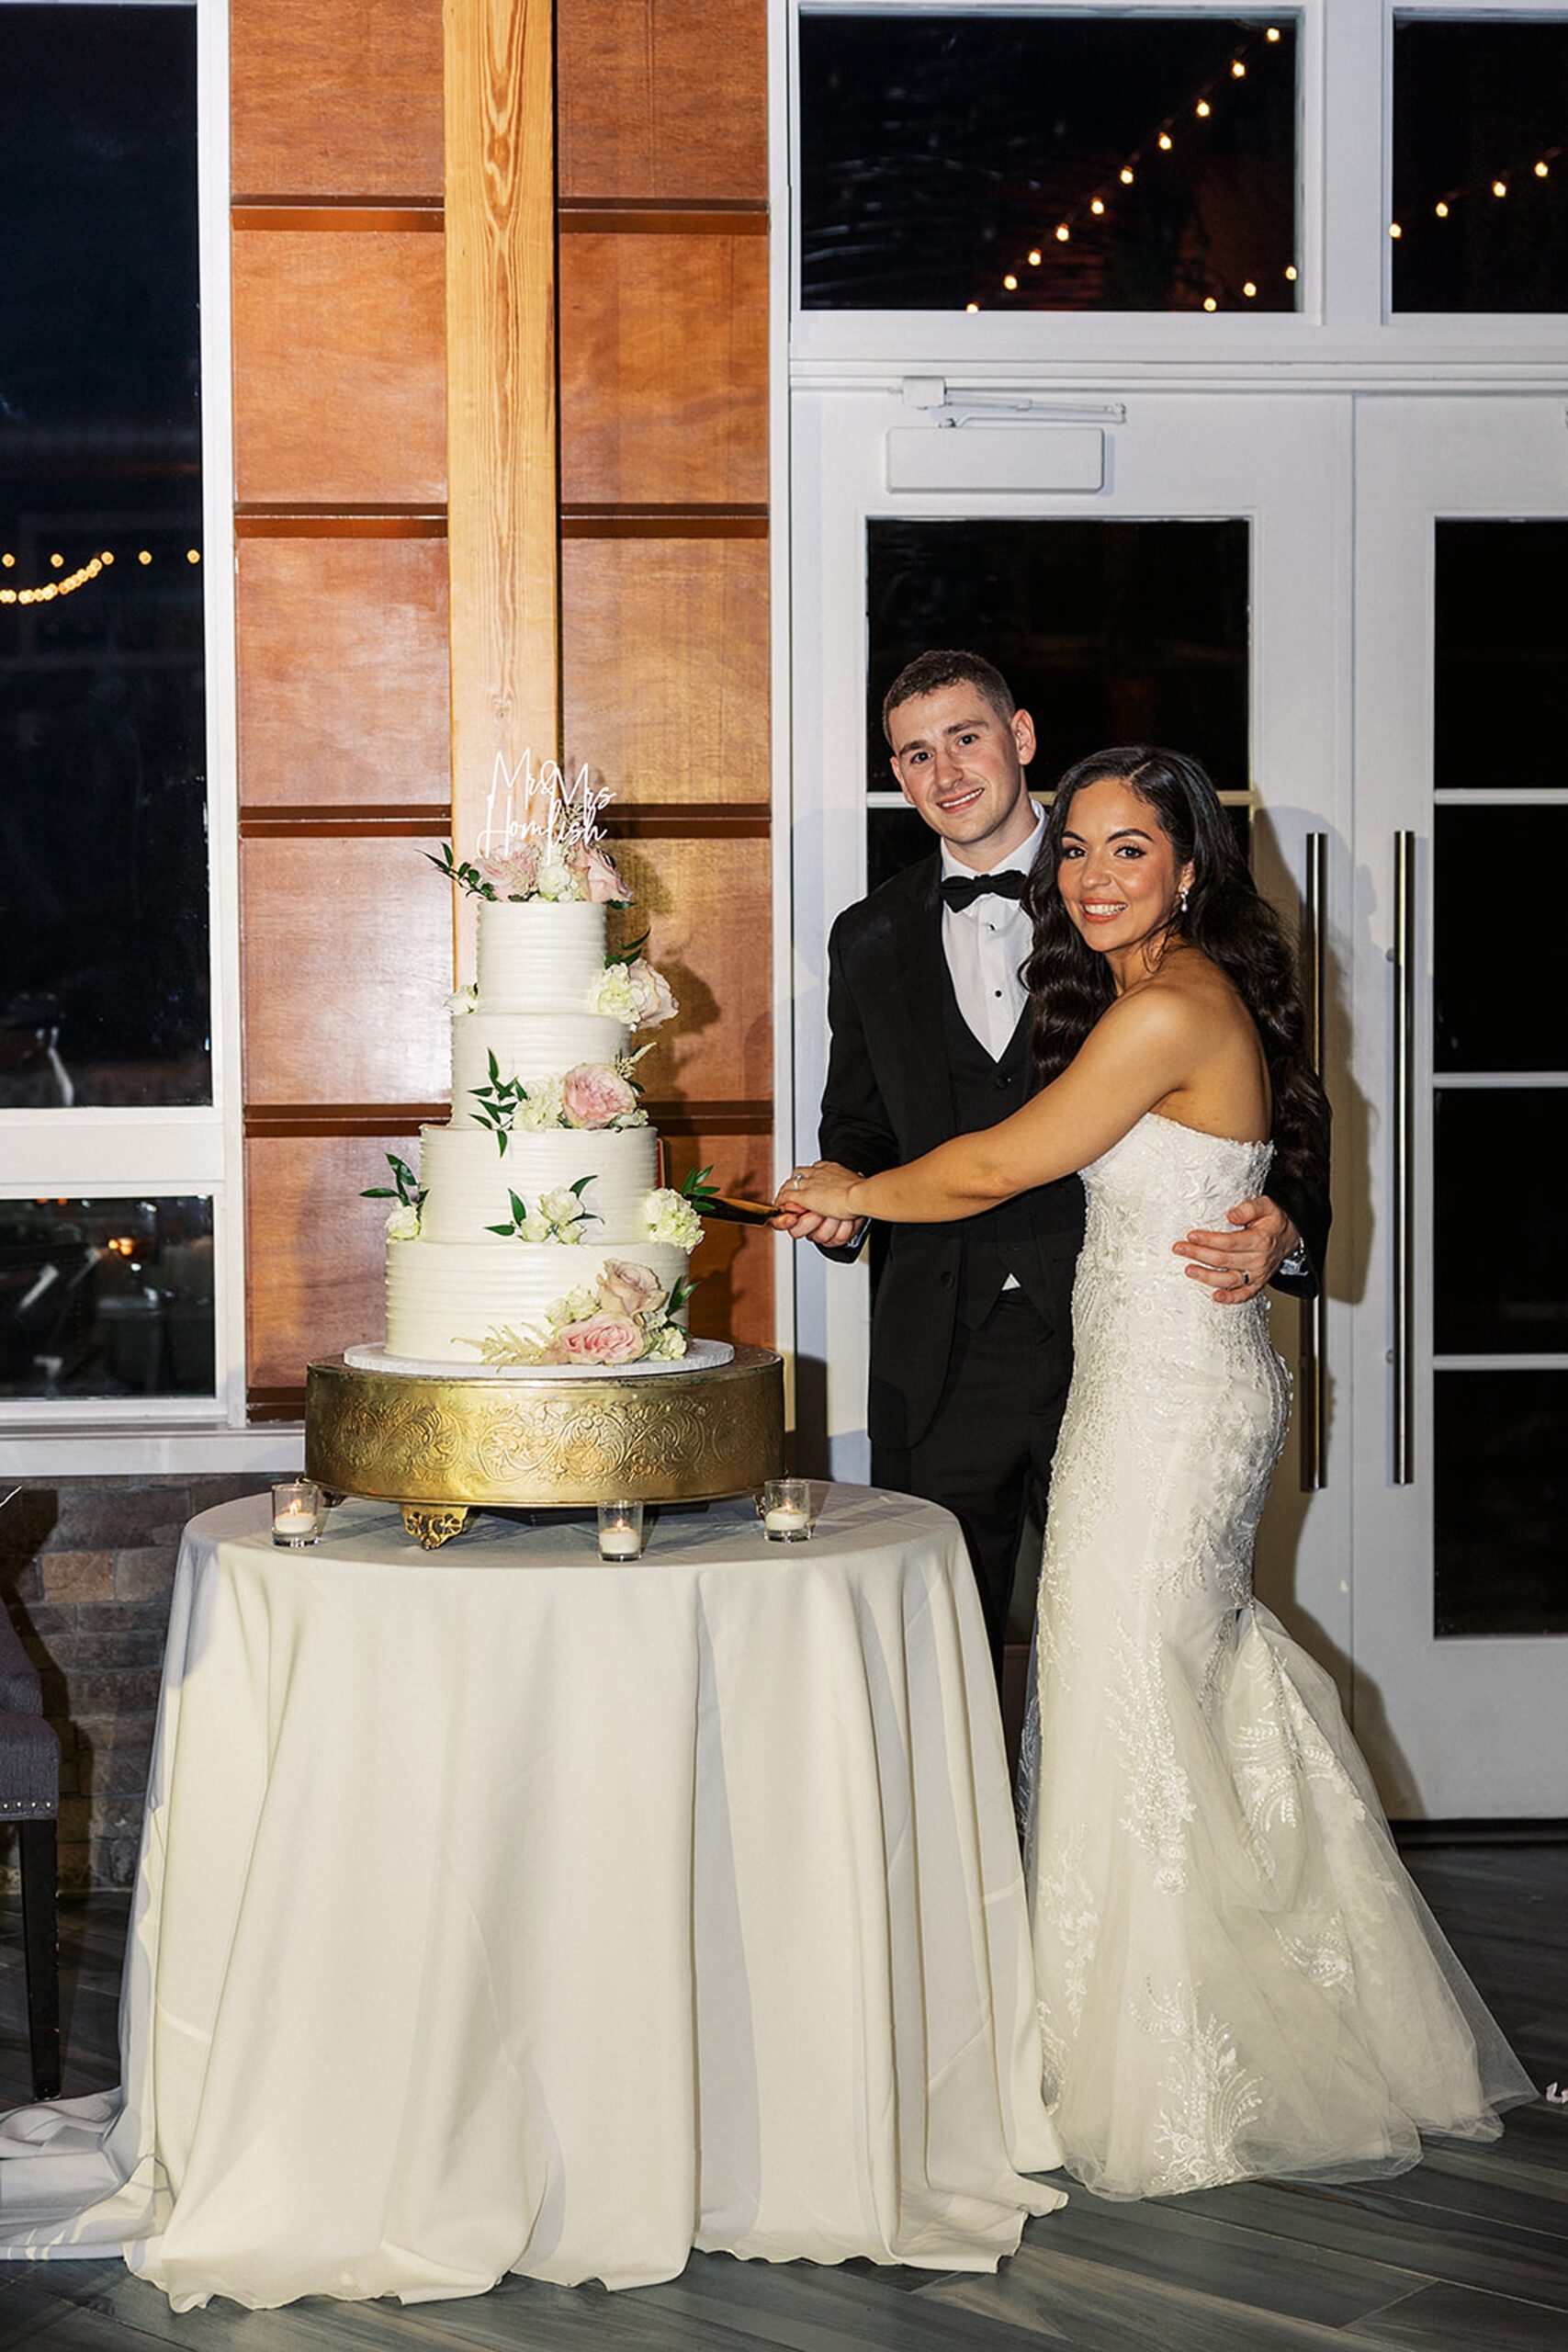 Newlyweds cut the cake covered in flowers at their Stonehouse At Stirling Ridge Wedding